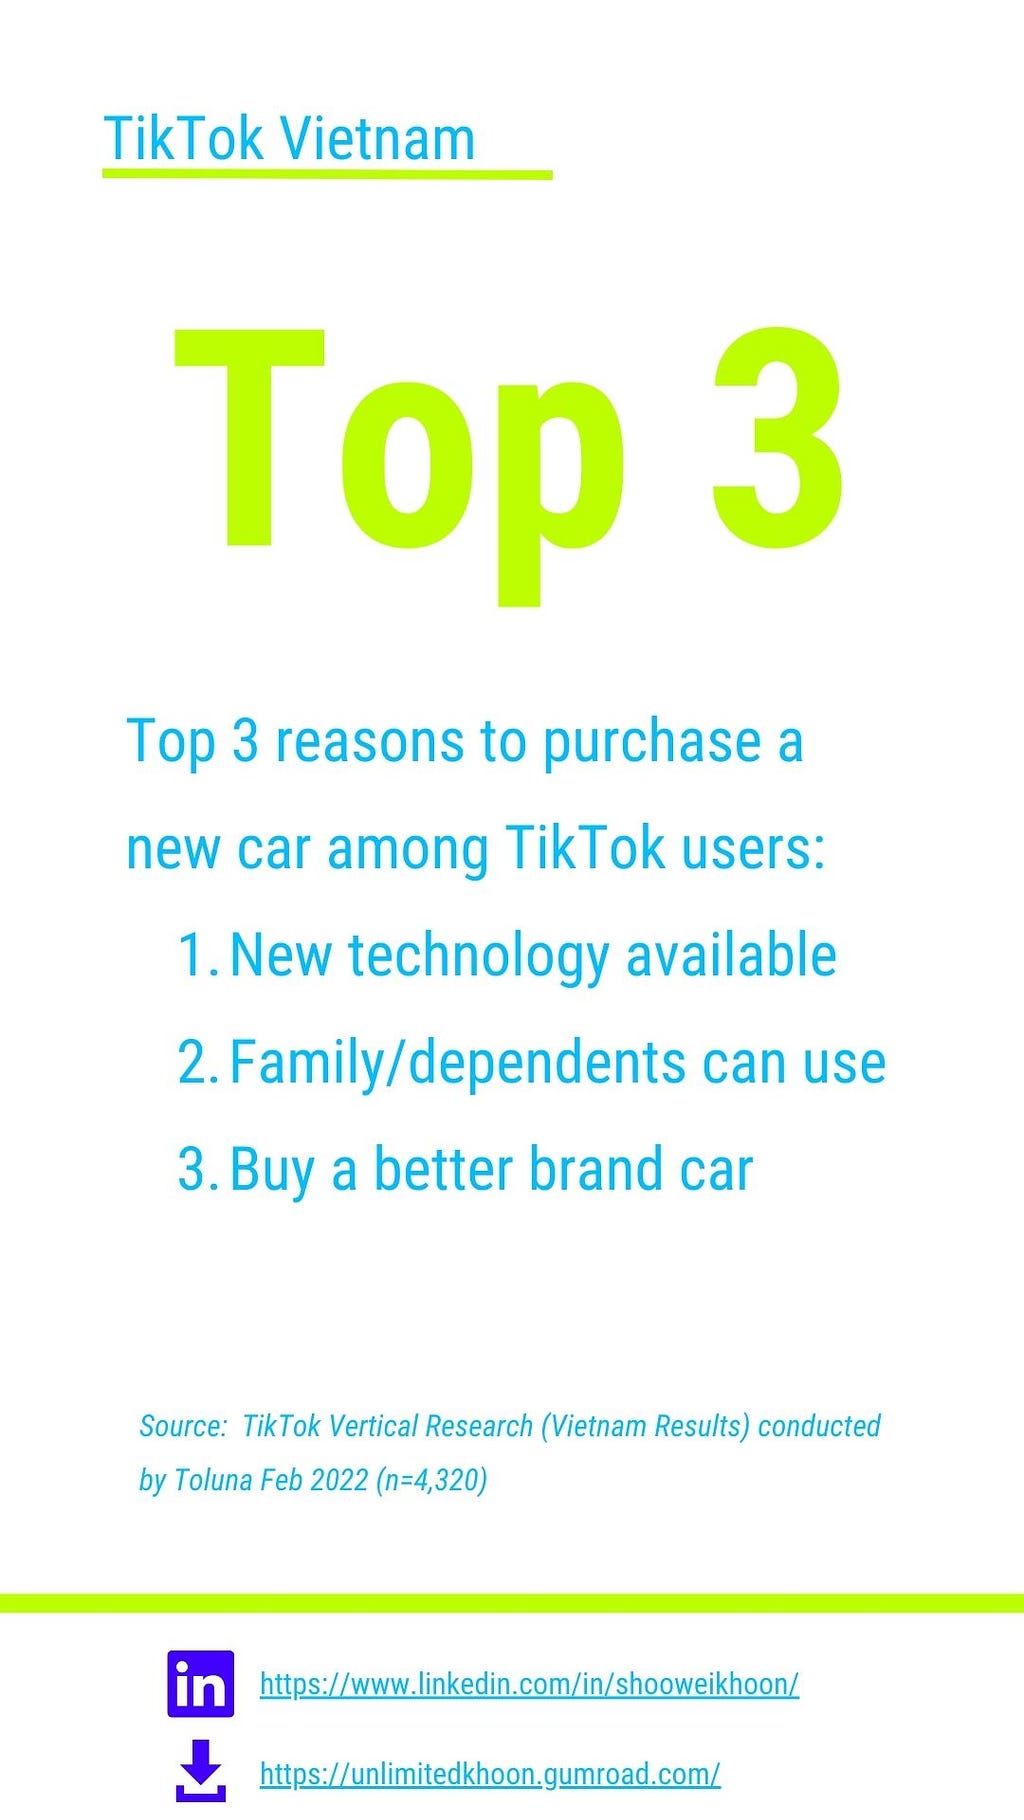 Top 3 reasons to purchase a new car among VN TikTok users